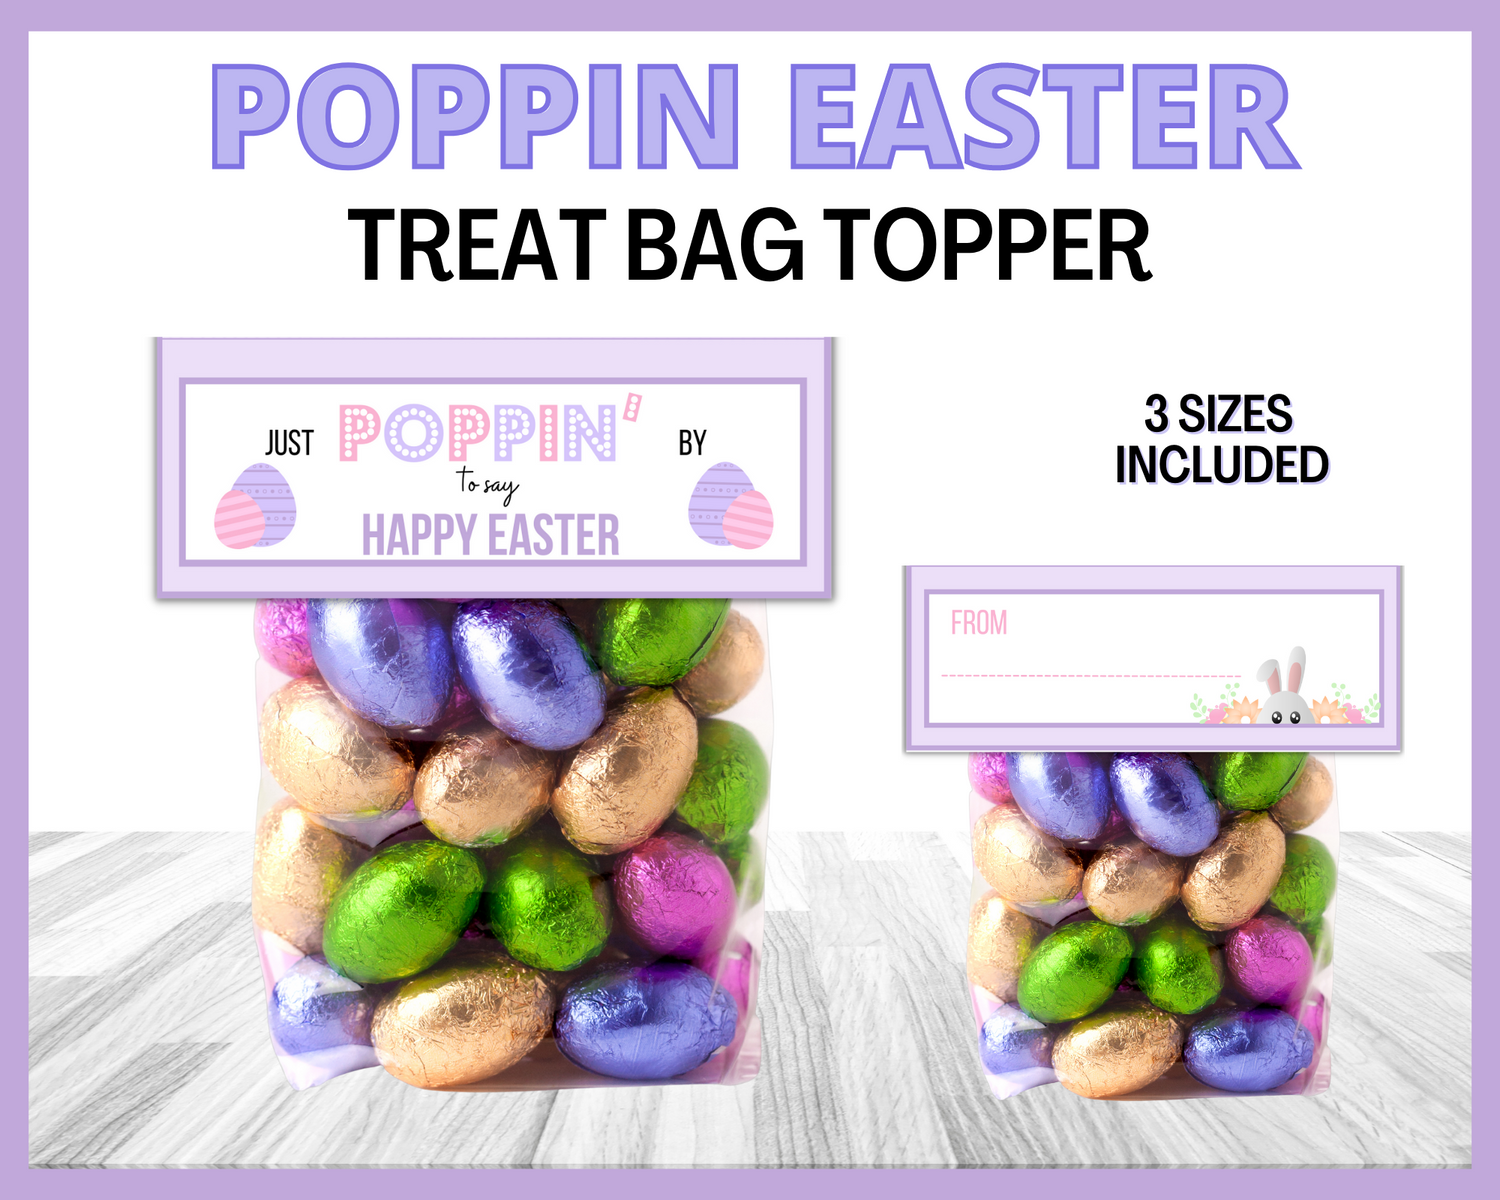 Just Popping By to say Happy Easter Treat Bag topper printable